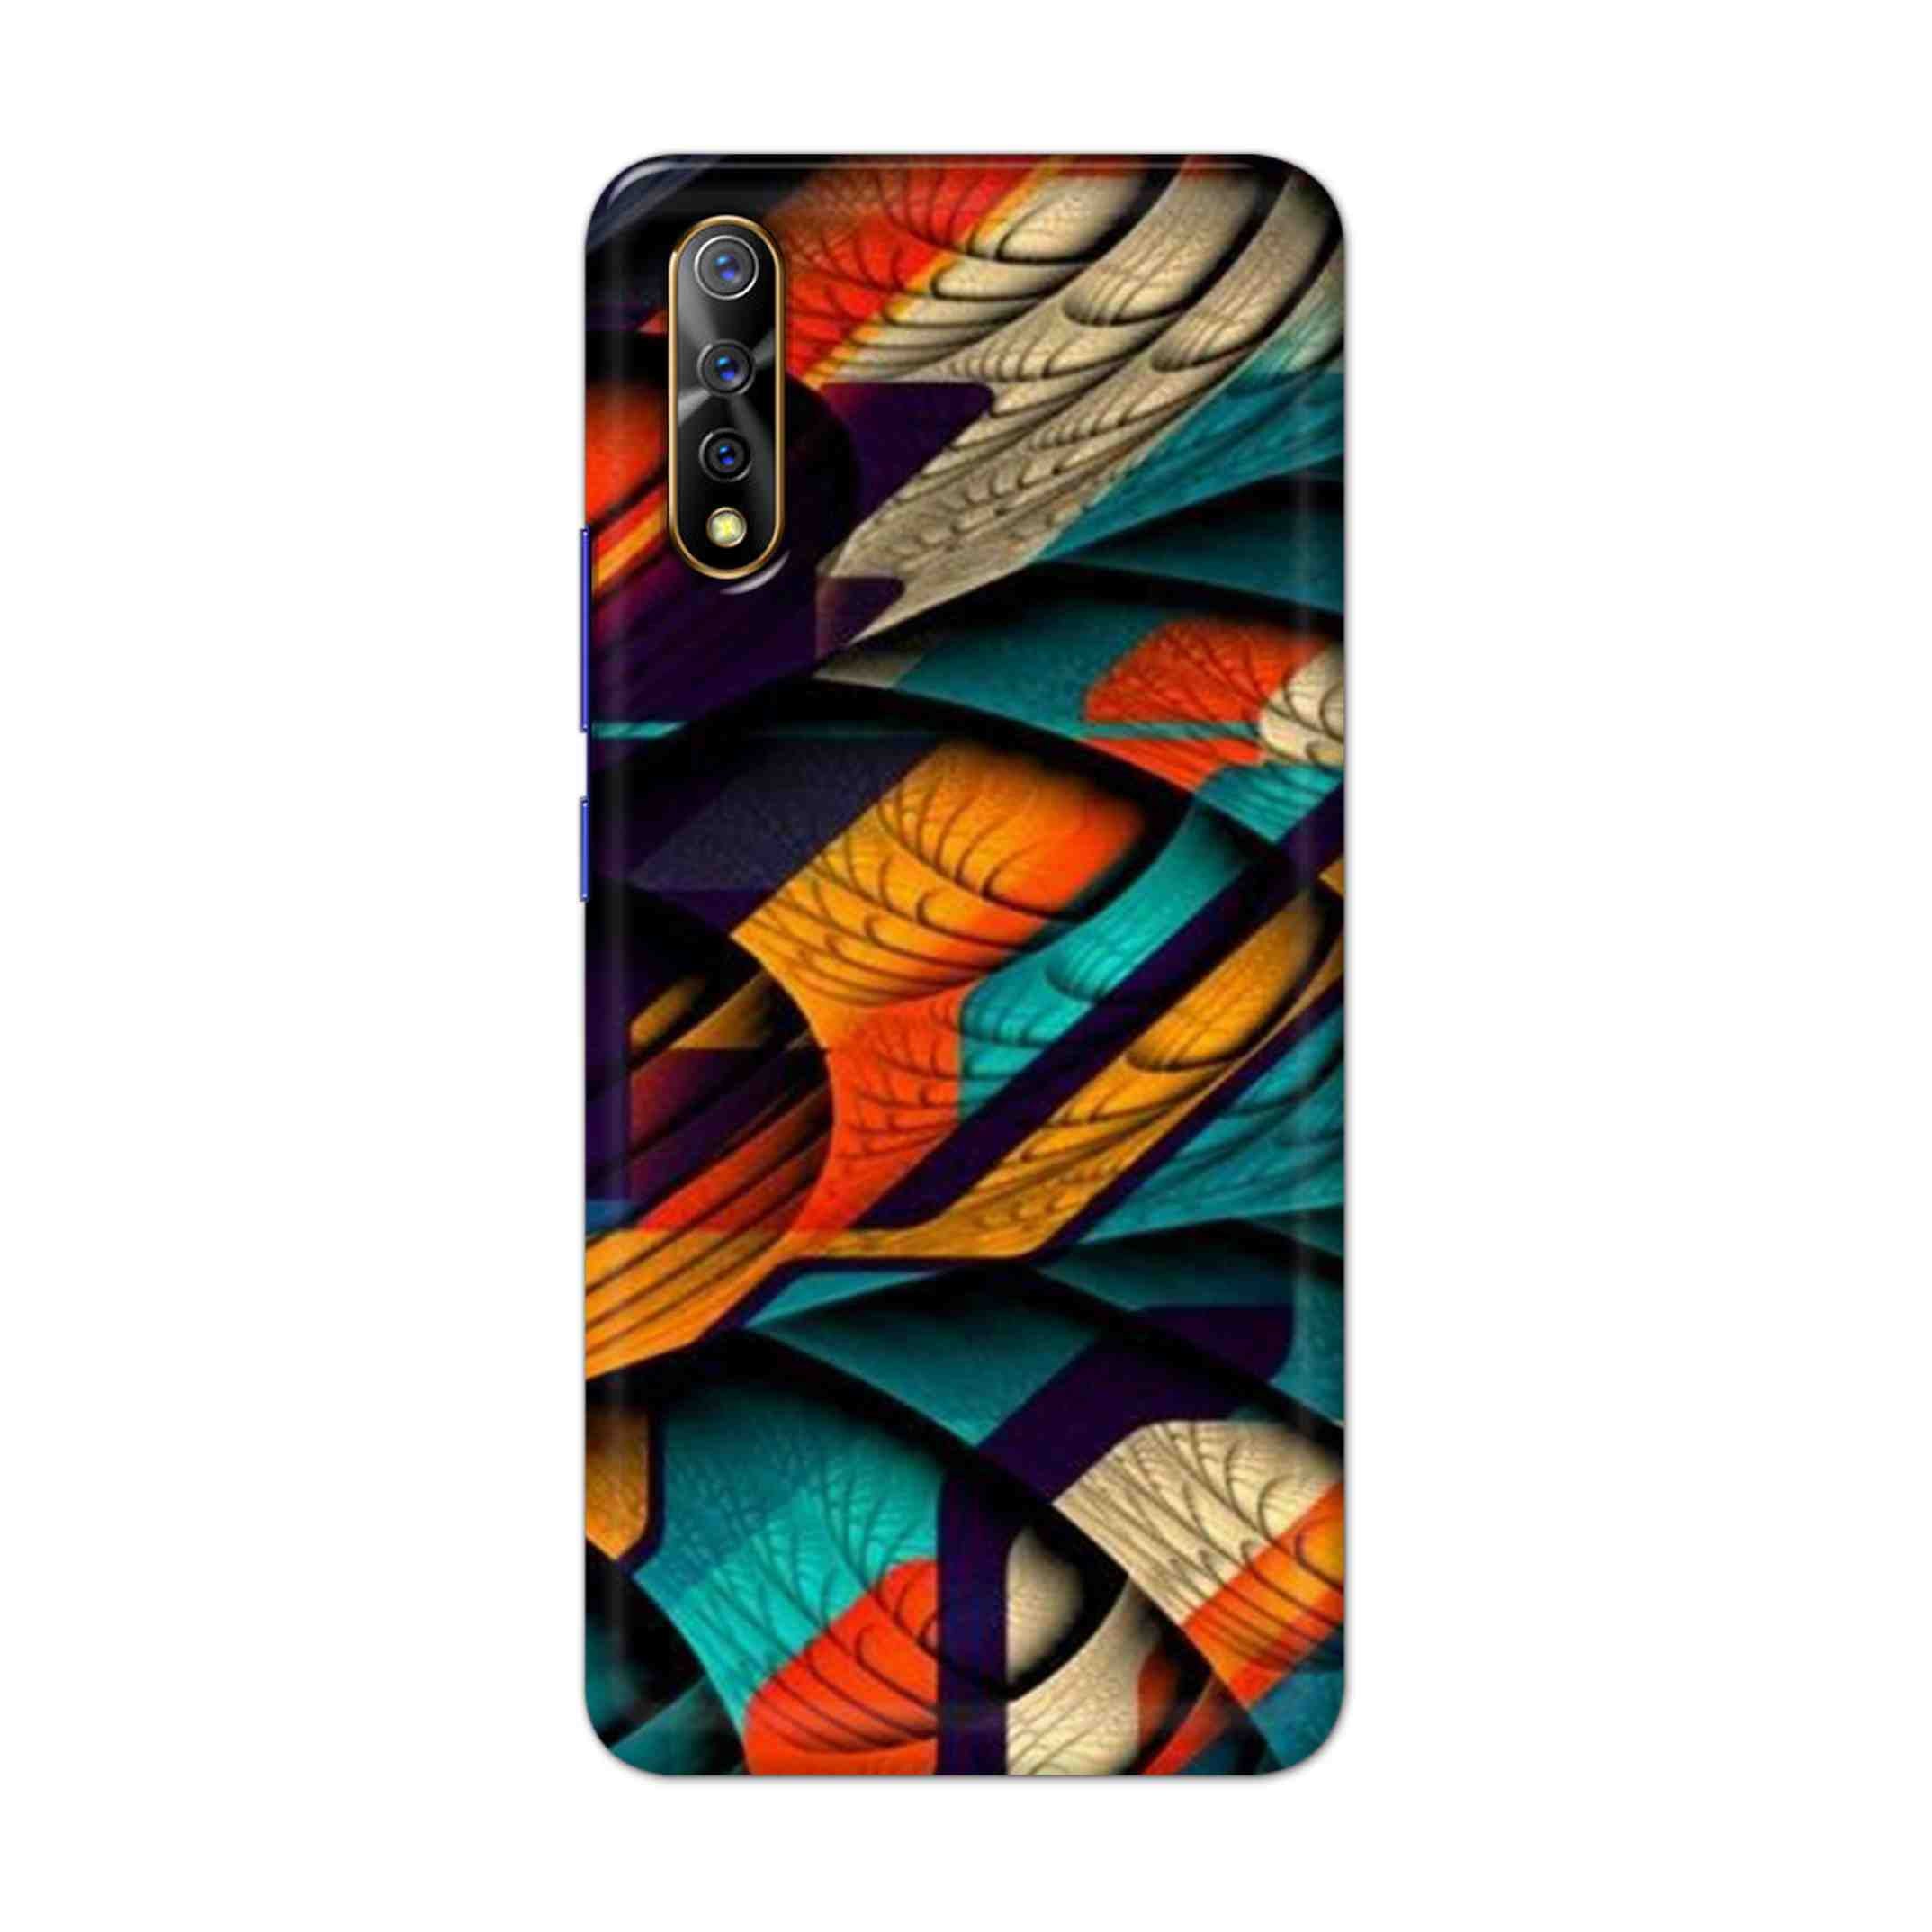 Buy Colour Abstract Hard Back Mobile Phone Case Cover For Vivo S1 / Z1x Online